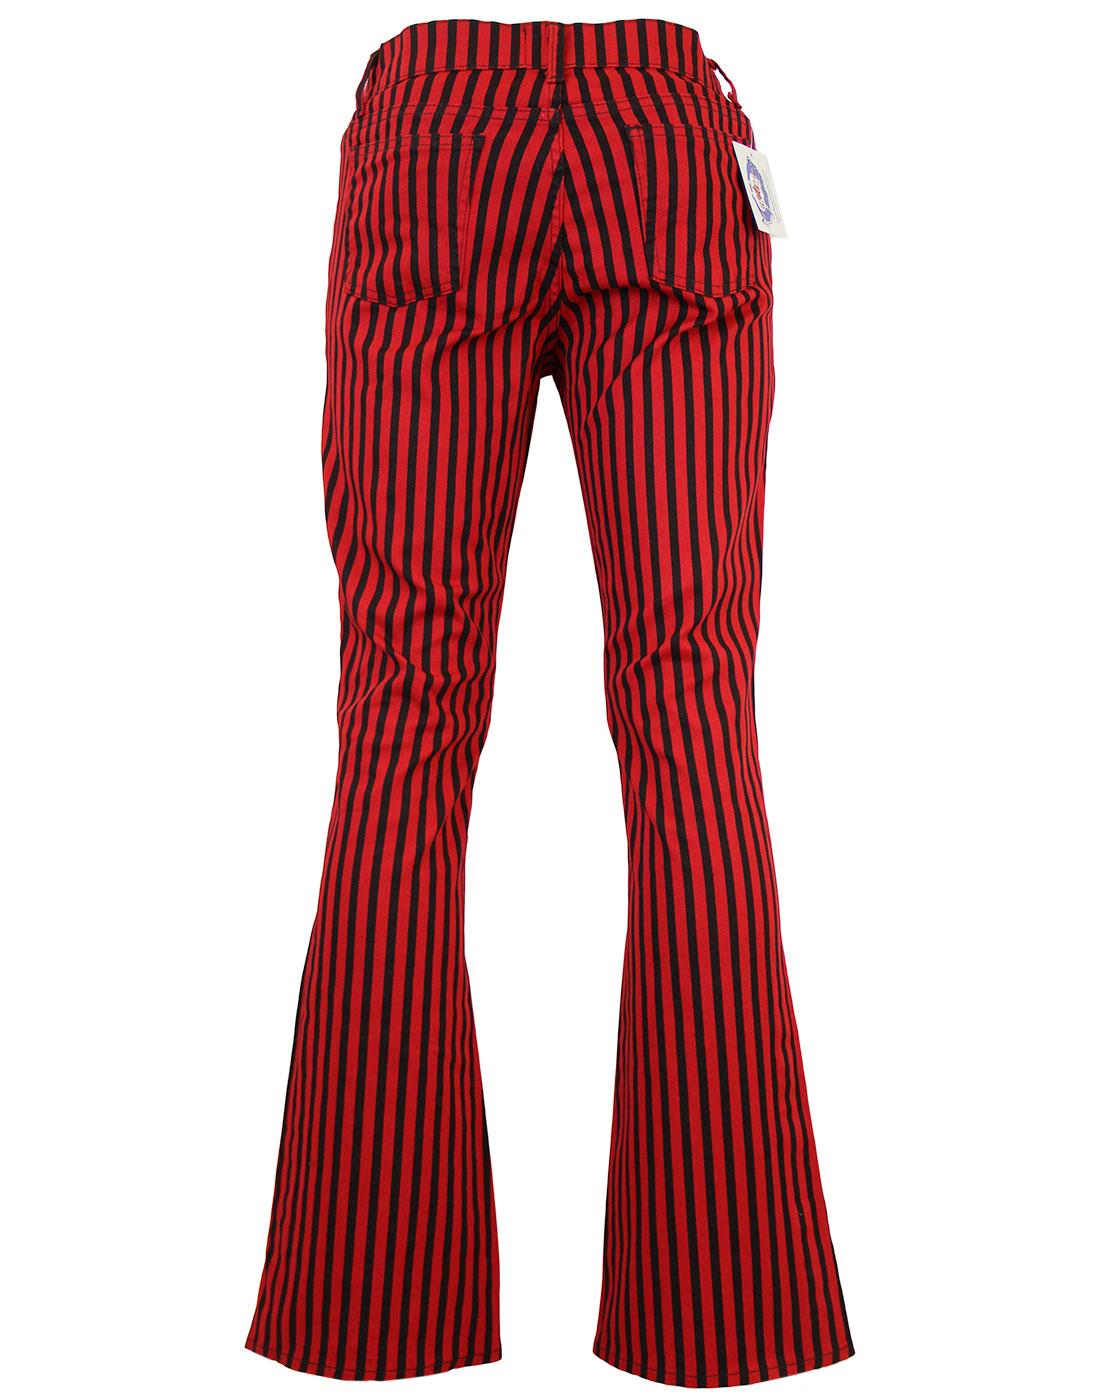 Madcap England 'Duke' Flares in Black/Red | Retro Mod Flared Jeans